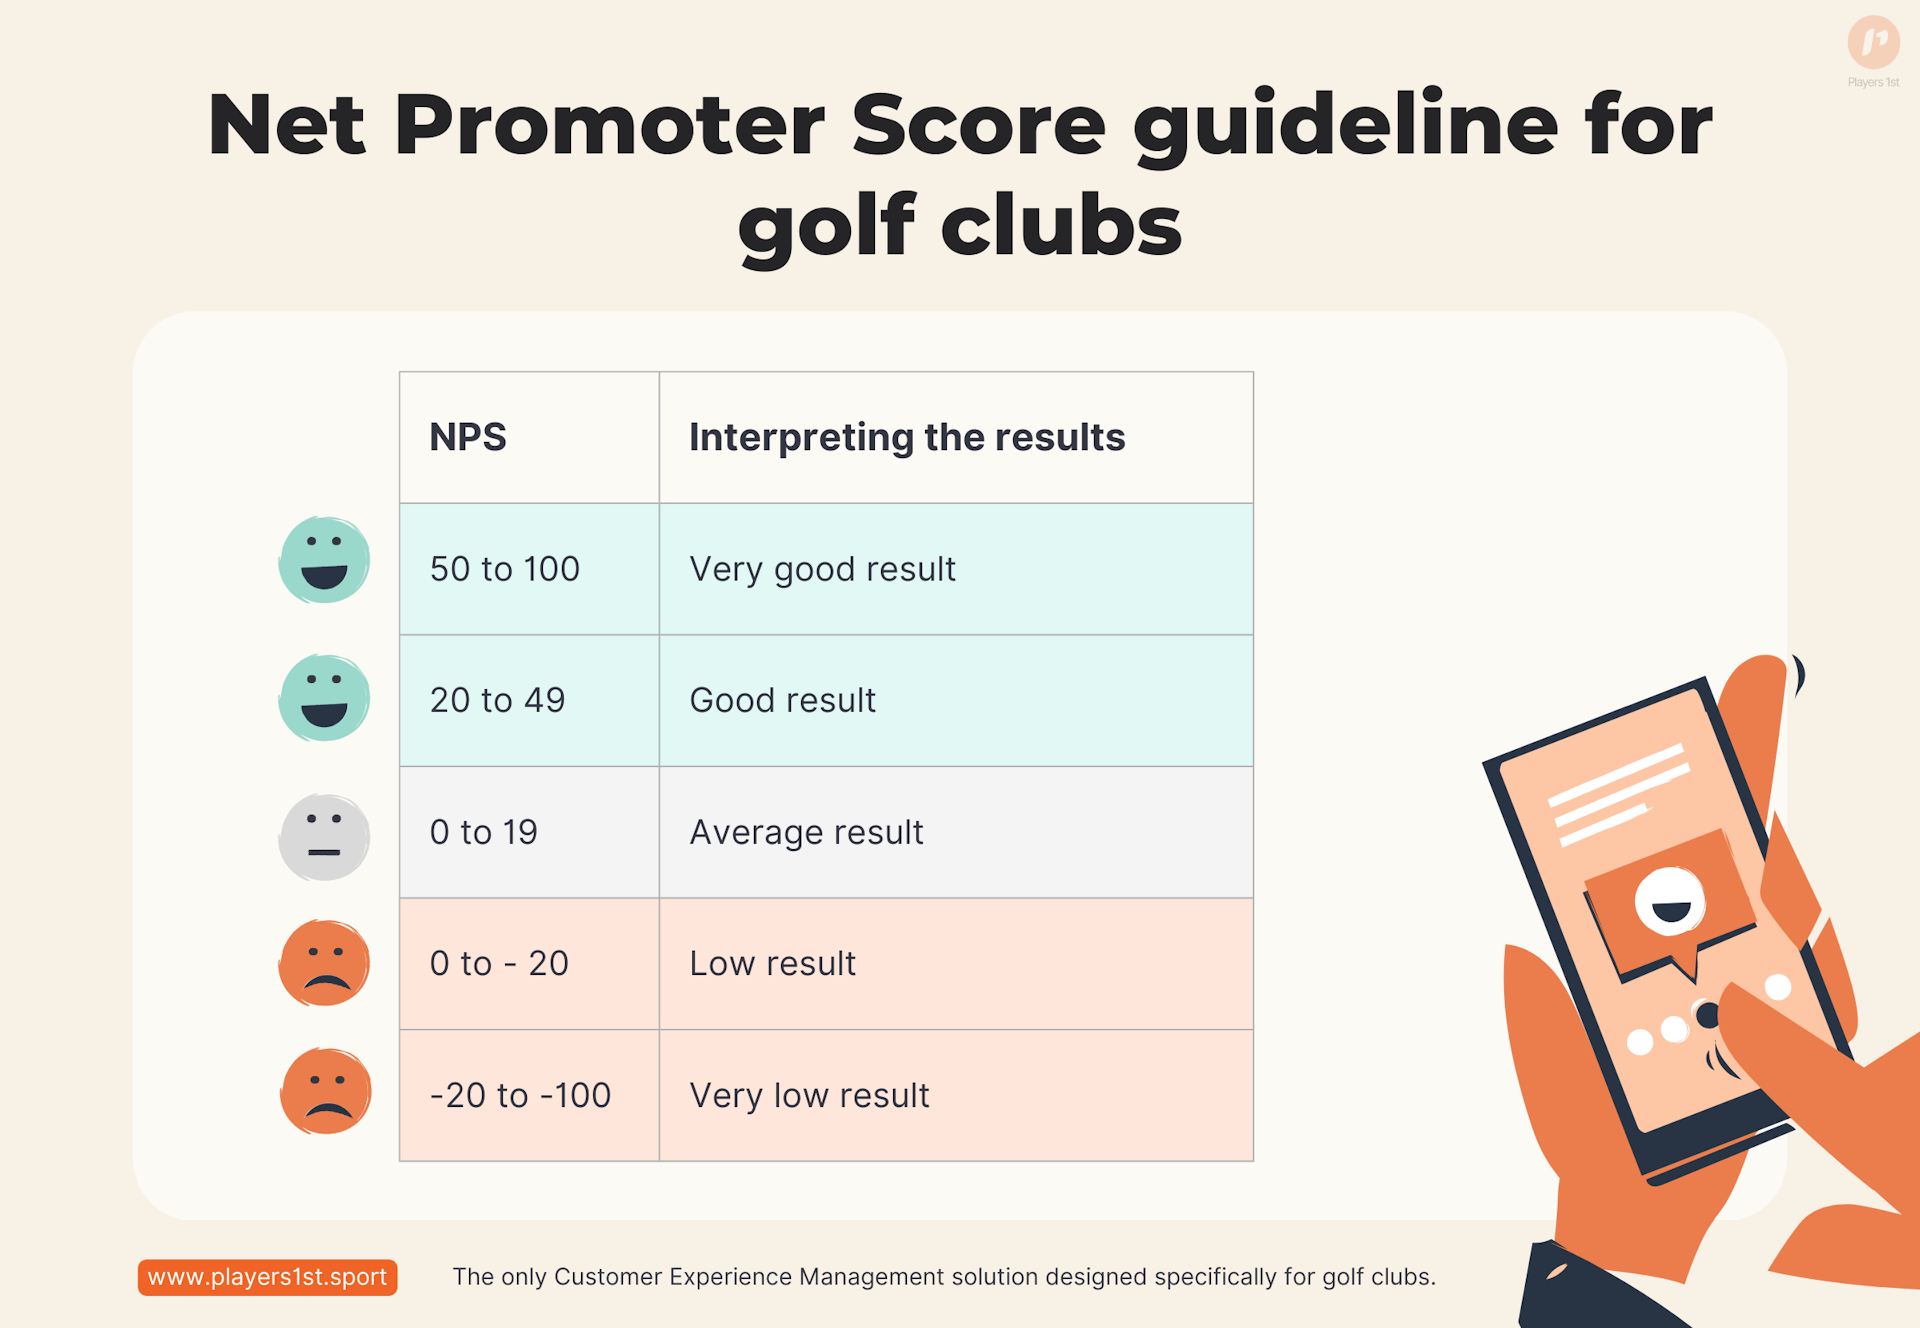 Net Promoter Score guideline for golf clubs.